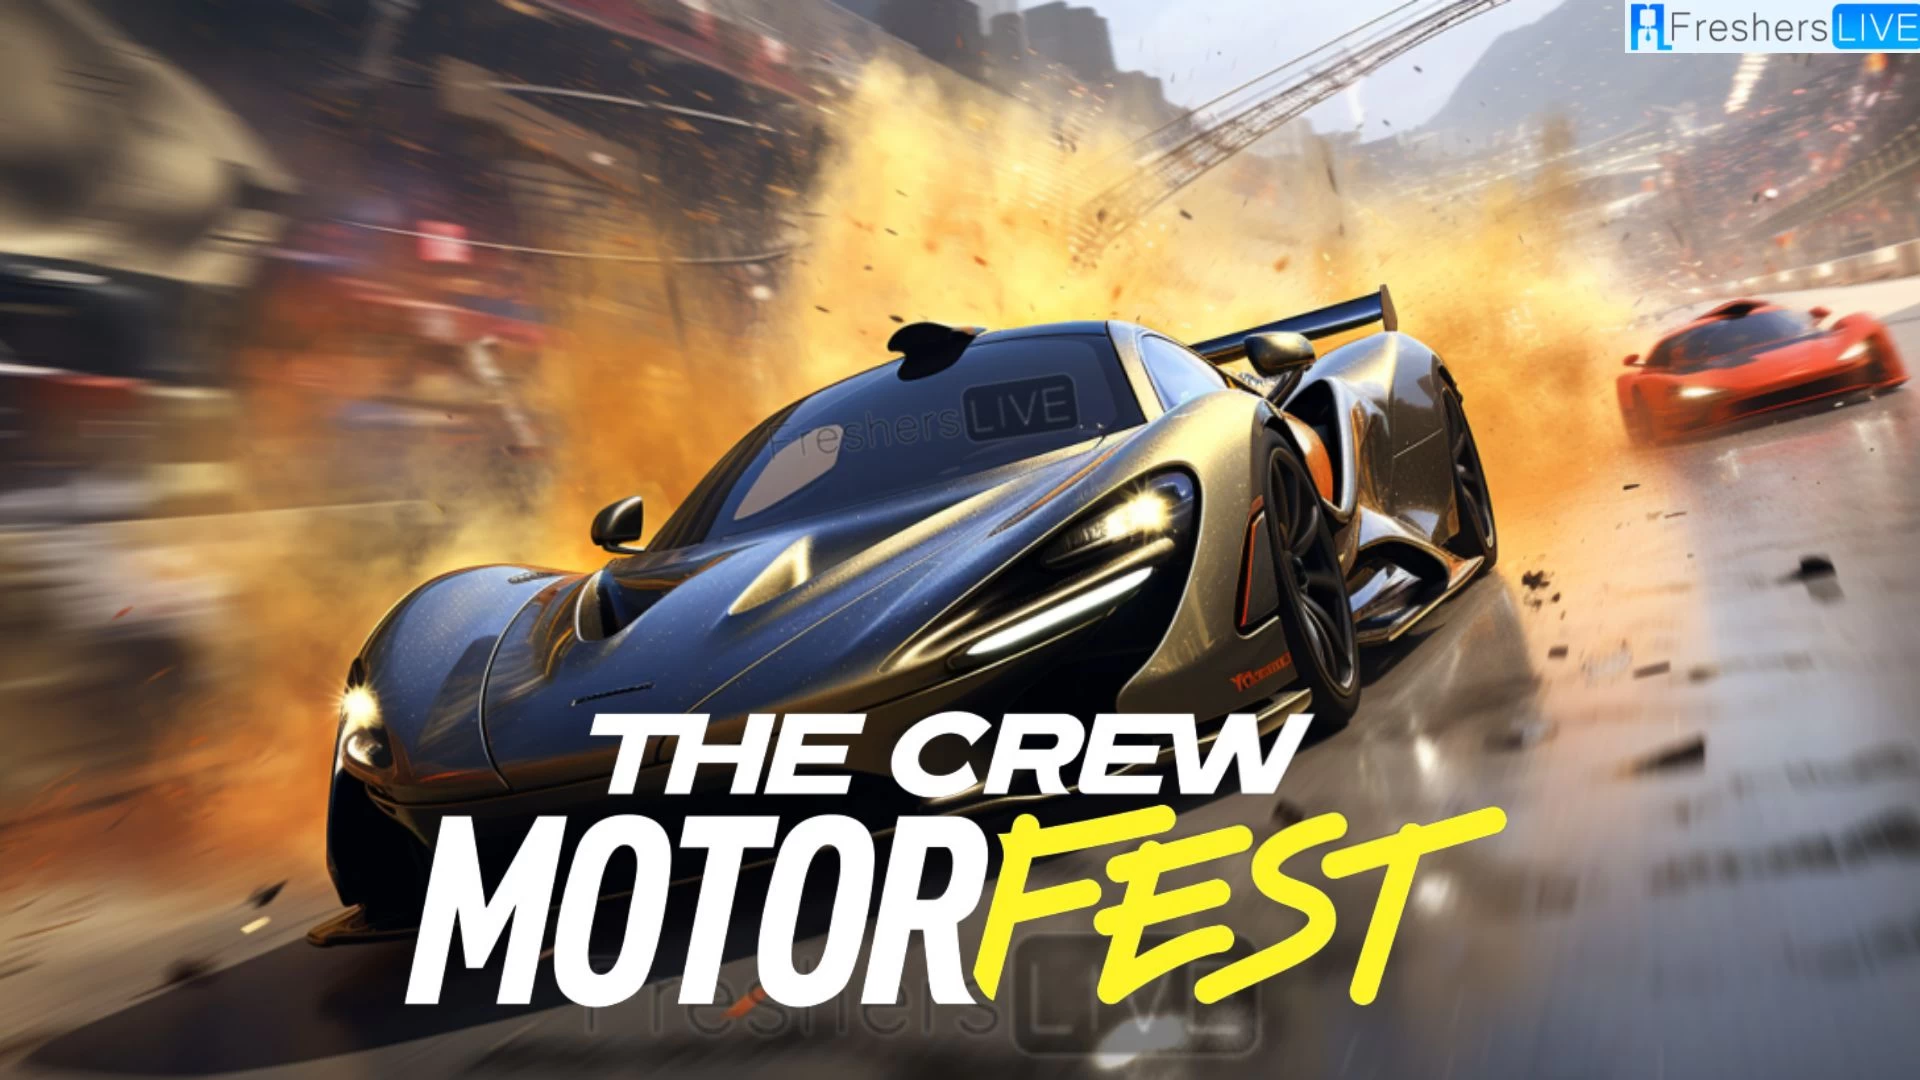 How to Get the Fastest Car in Crew Motorfest? What is the Fastest Car in the Crew Motorfest?